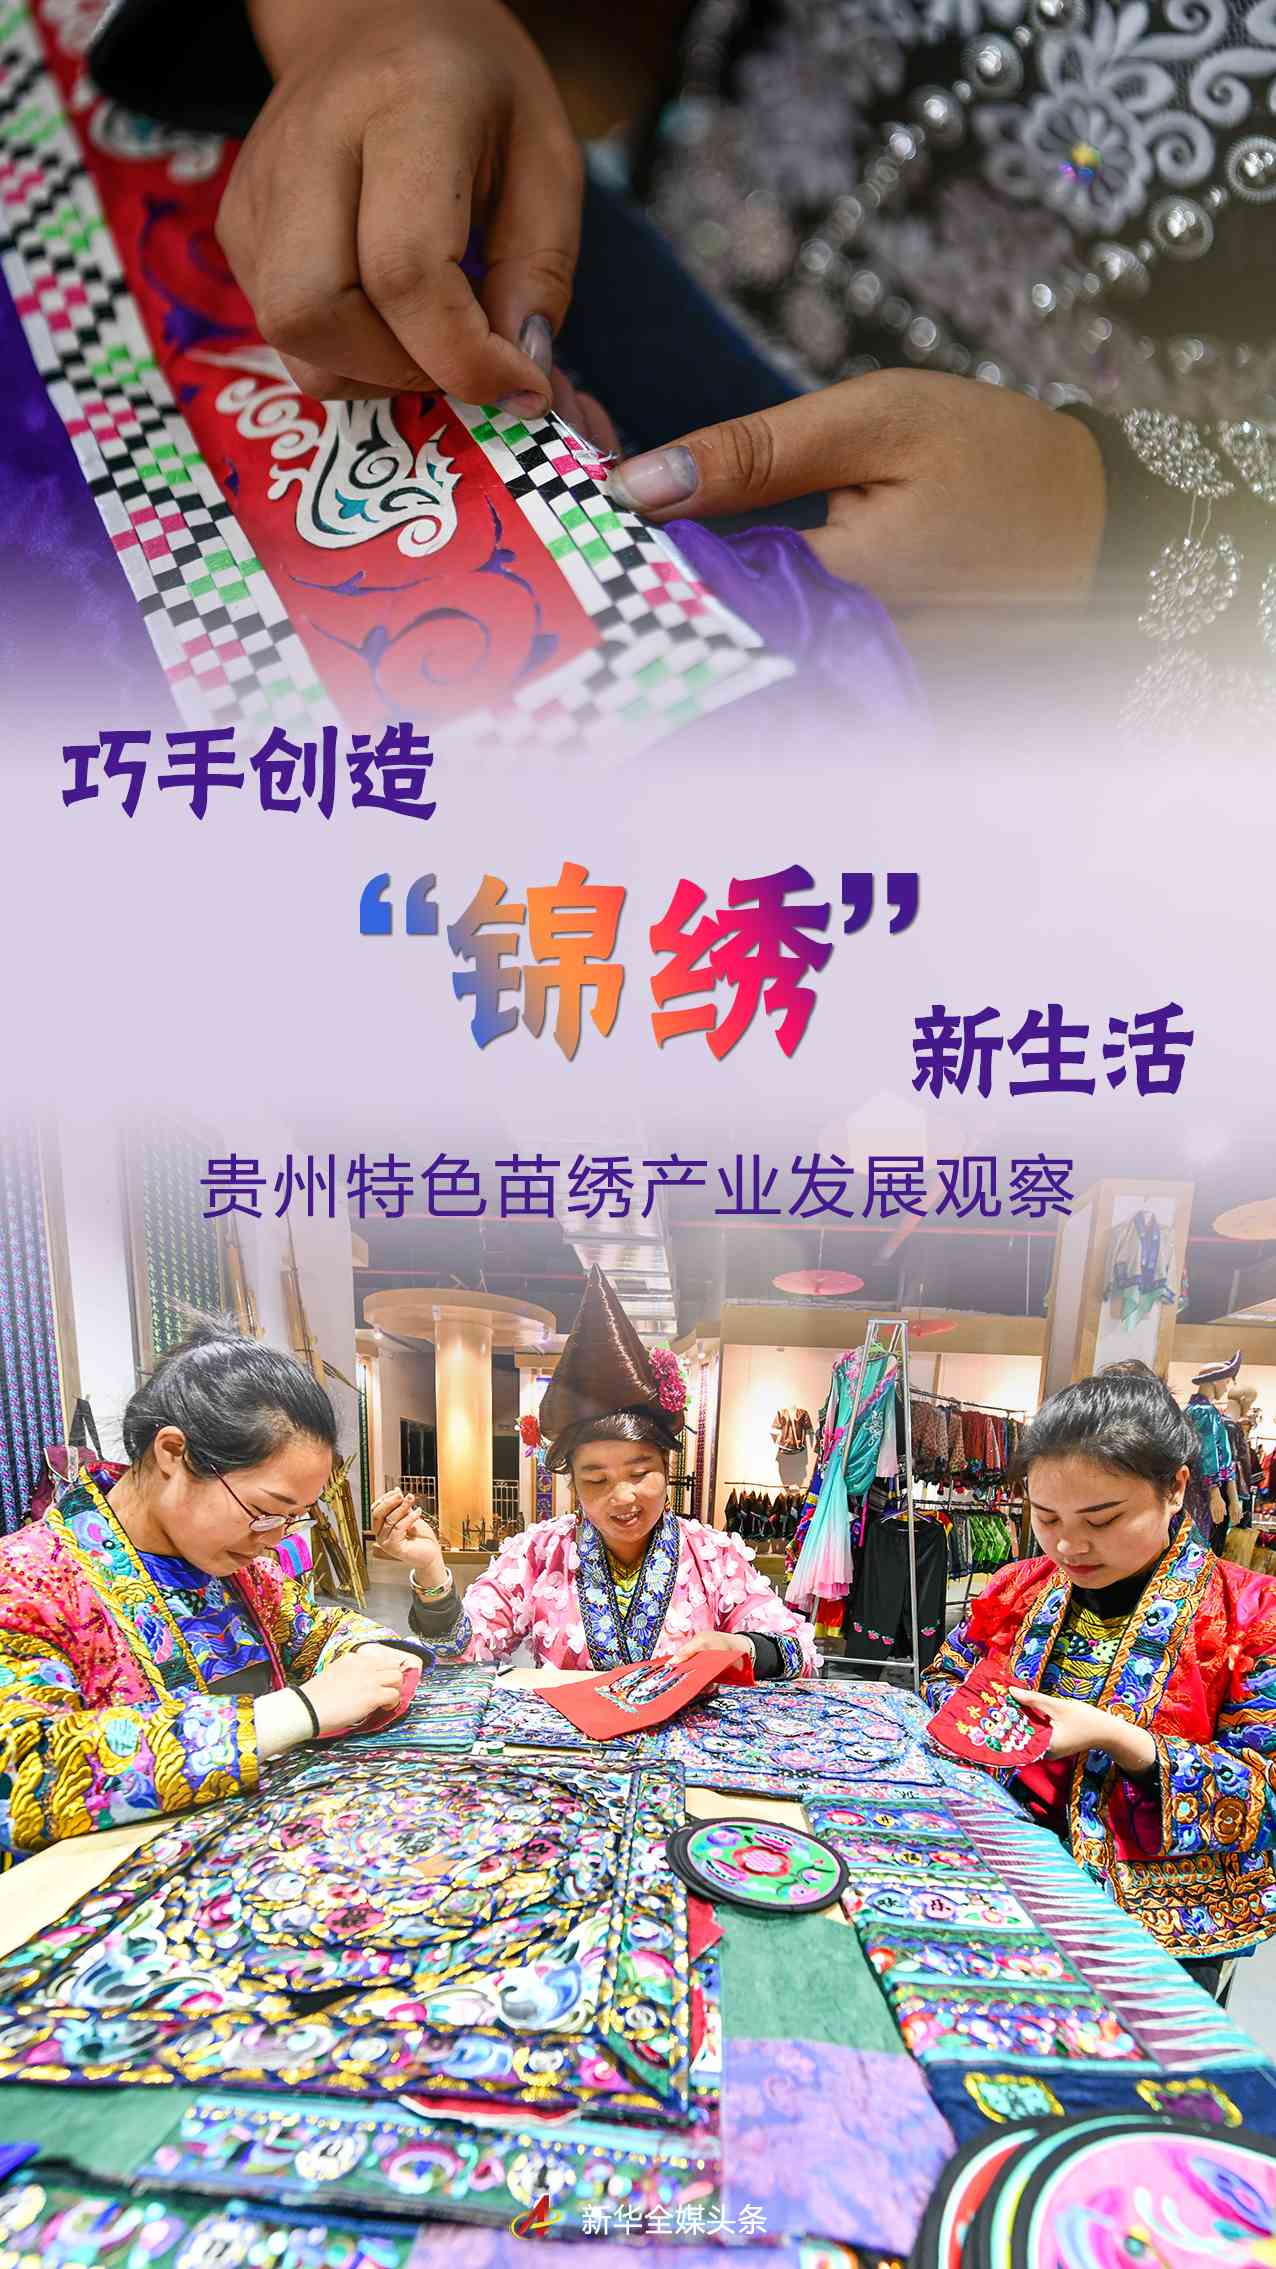 Skilled Hands Create a "Splendid" New Life - Observation on the Development of Guizhou's Characteristic Miao Embroidery Industry | Miao Embroidery | Life